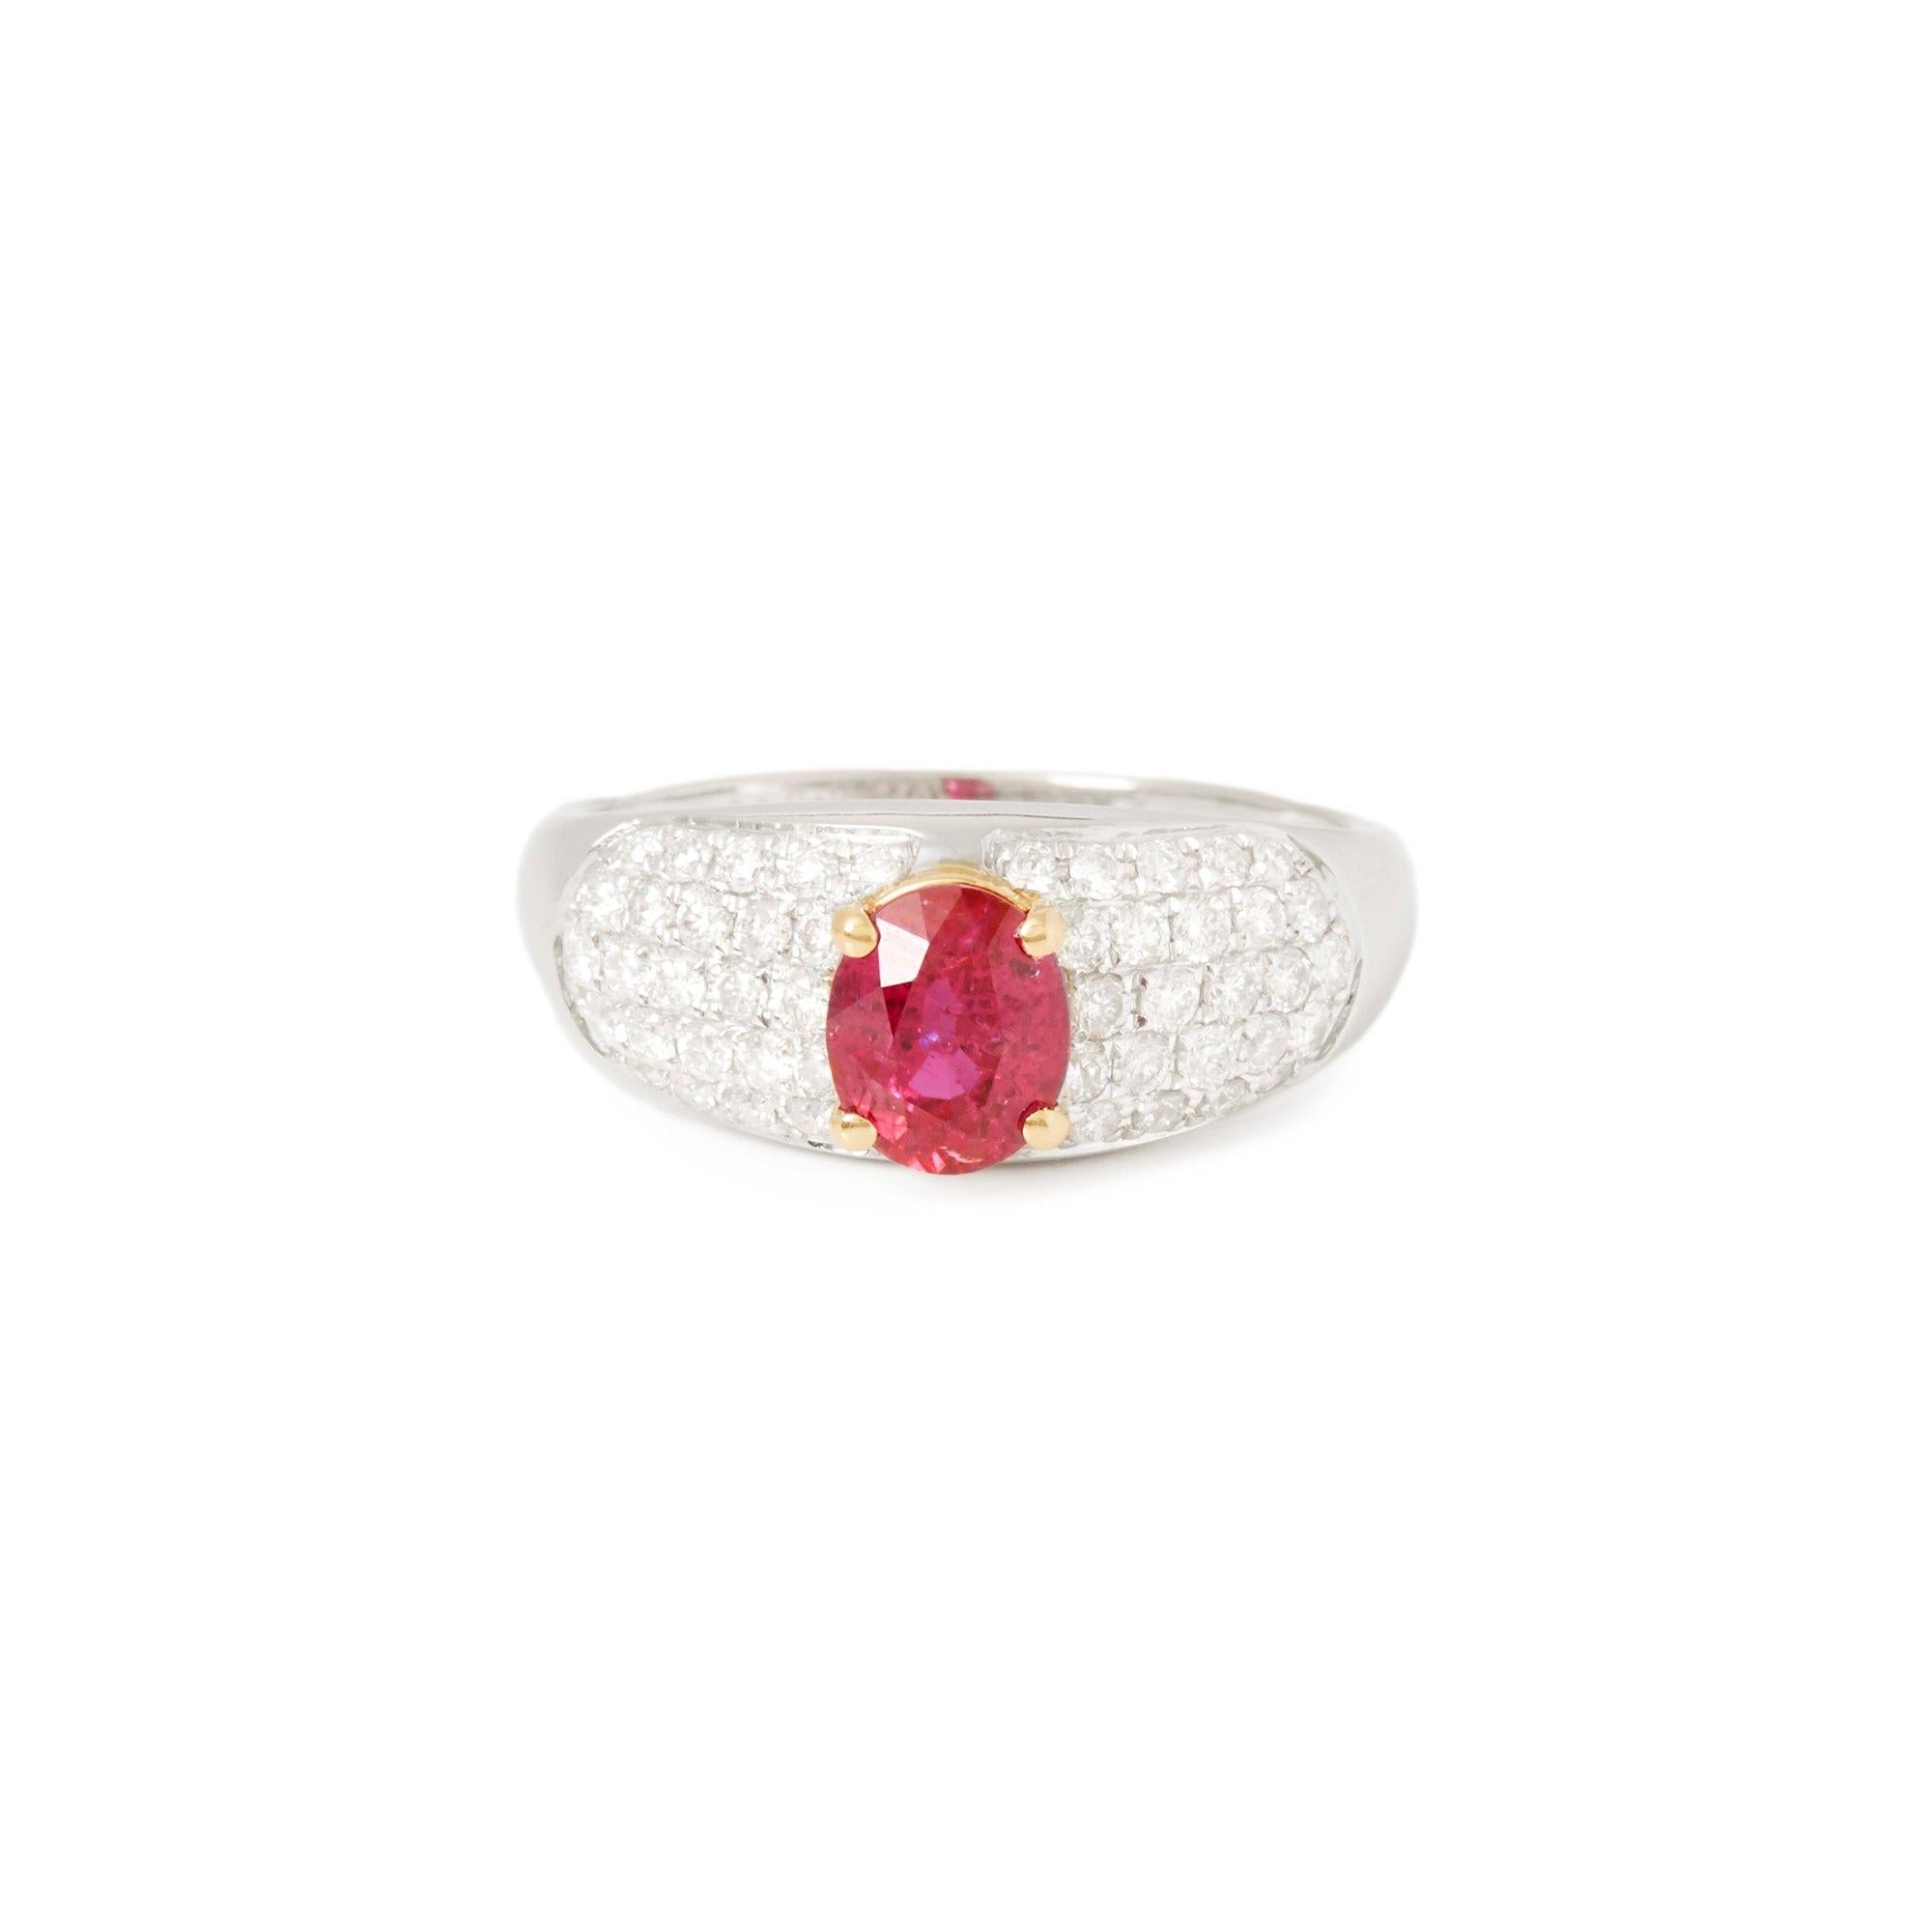 This ring designed by David Jerome is from his private collection and features one oval cut Ruby totalling 1.21cts sourced in Mozambique. Set with round brilliant cut Diamonds totalling 0.63cts mounted in an 18k white gold Setting. UK finger size M